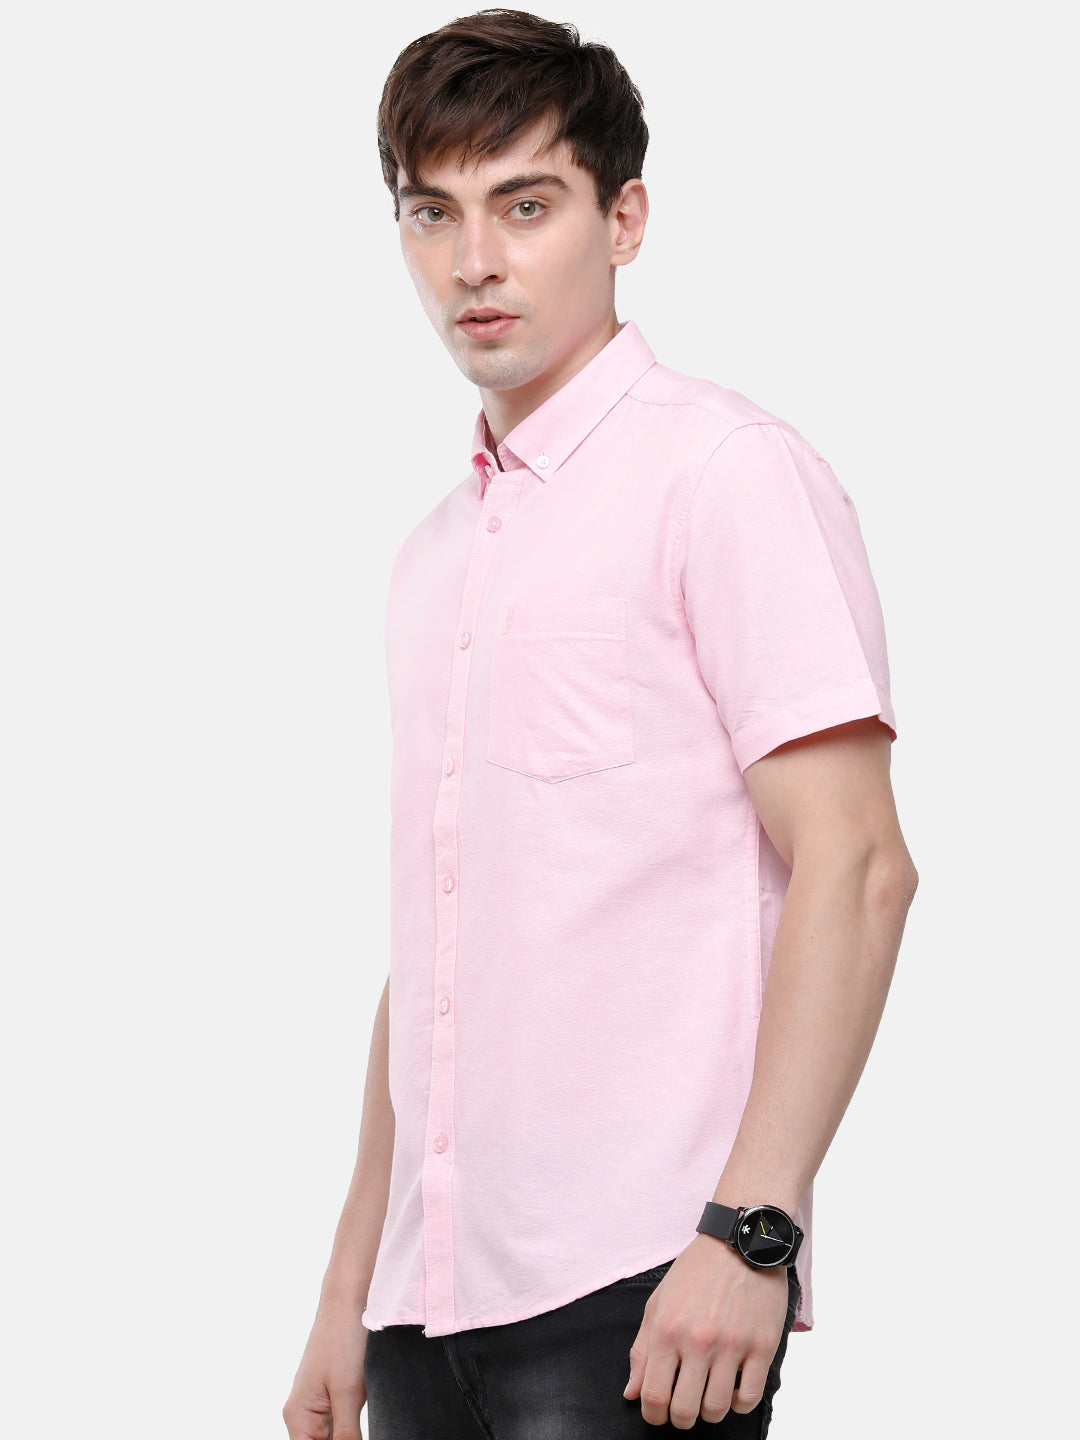 Classic Polo Men's Cotton Pink Solid Half Sleeve Shirt - Enzo-Pink-Mf-Hs